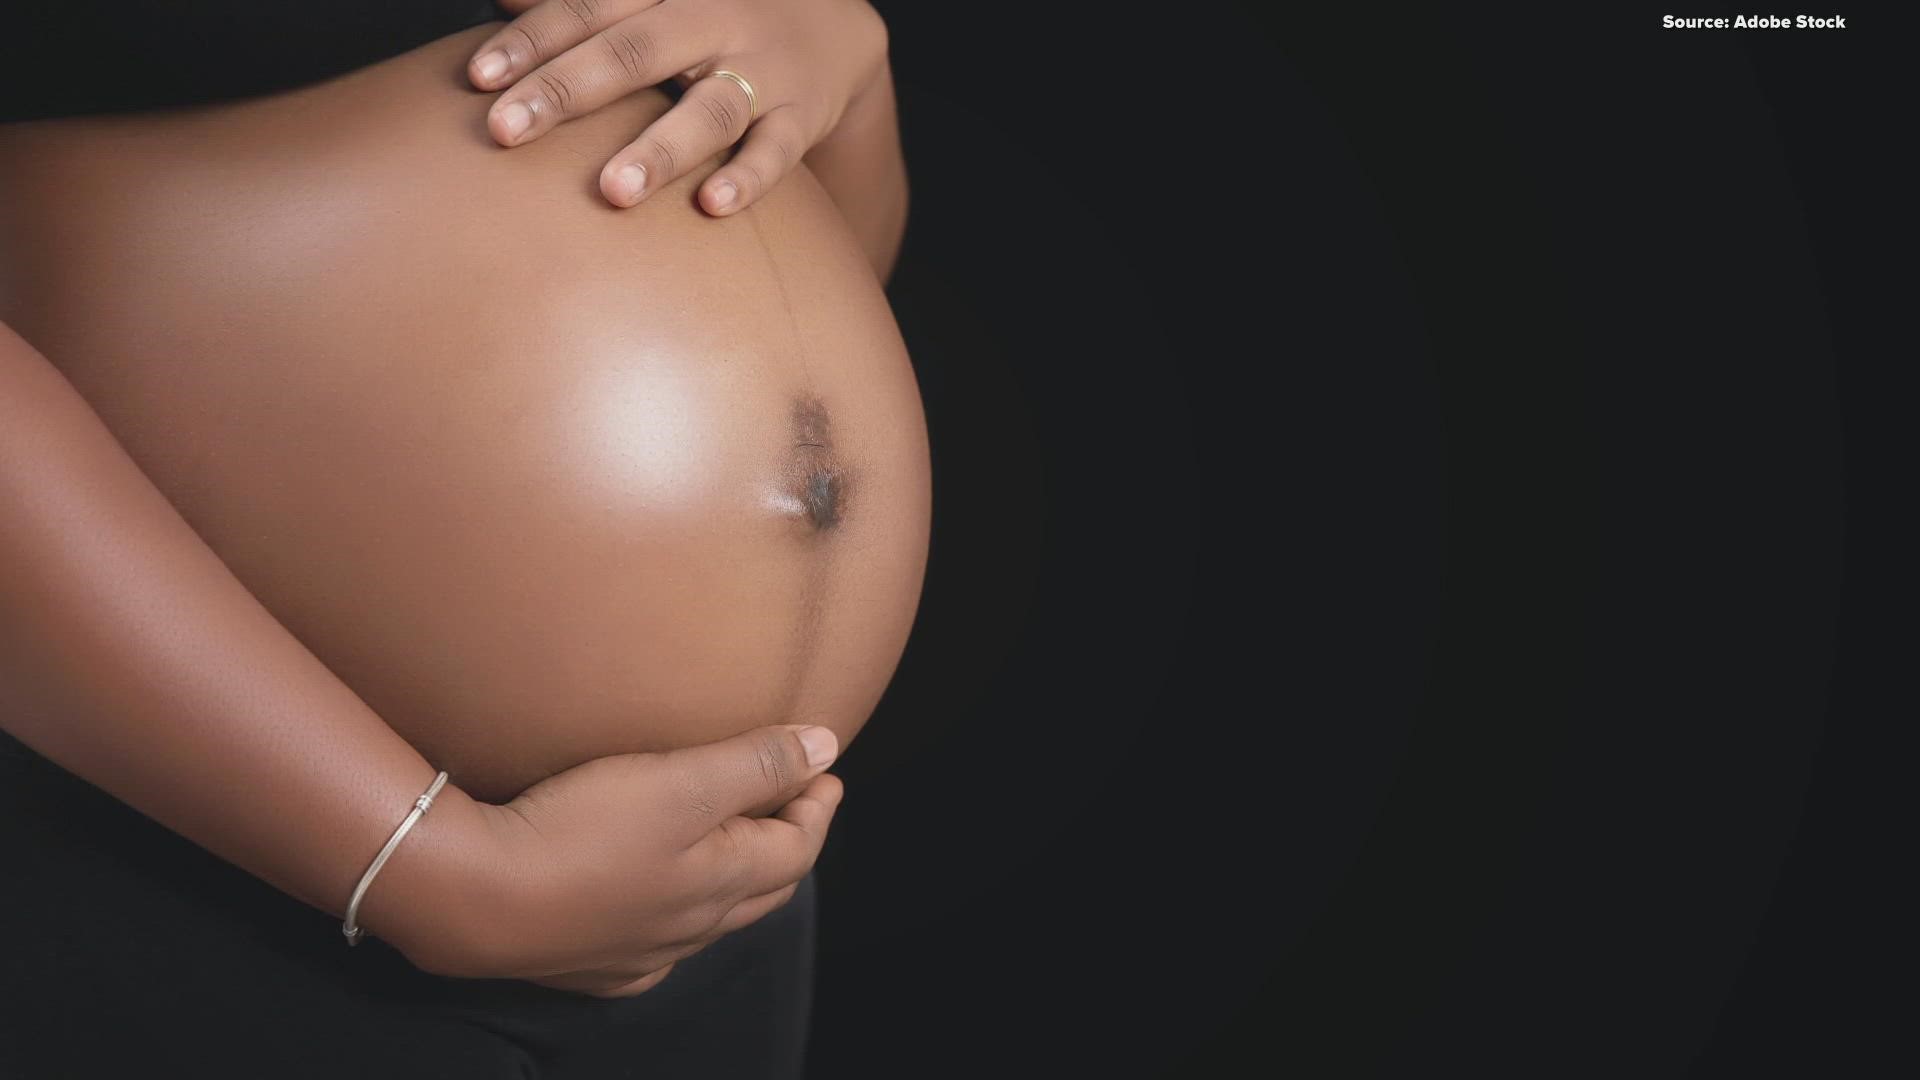 A Duke University study suggests that a complete abortion ban could increase Black maternal deaths by 33%.